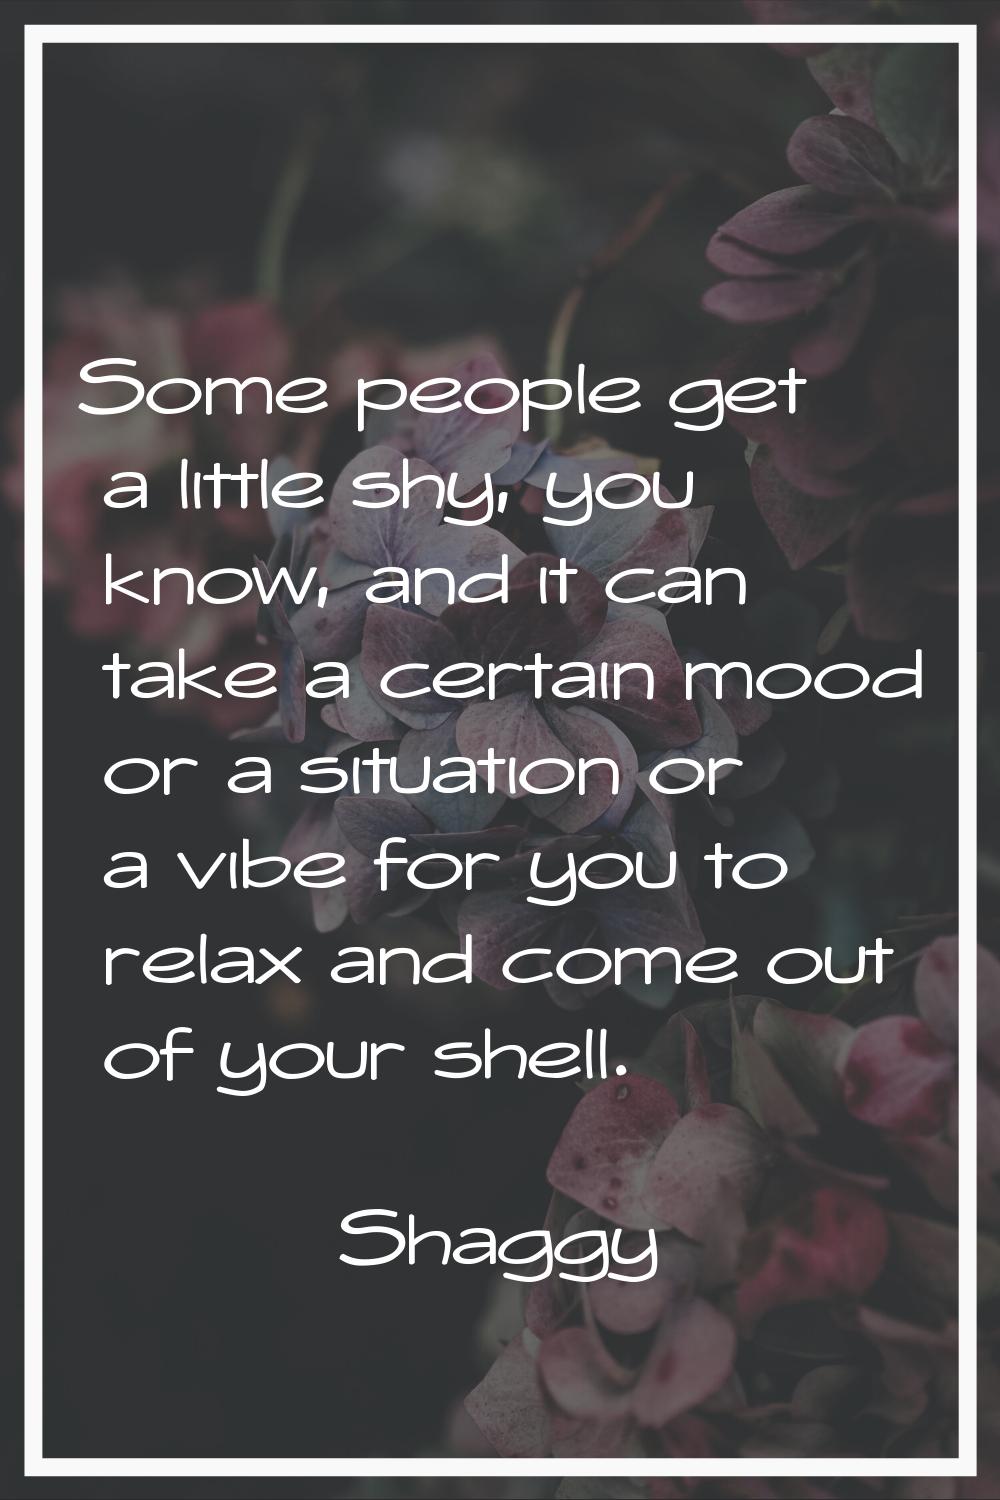 Some people get a little shy, you know, and it can take a certain mood or a situation or a vibe for